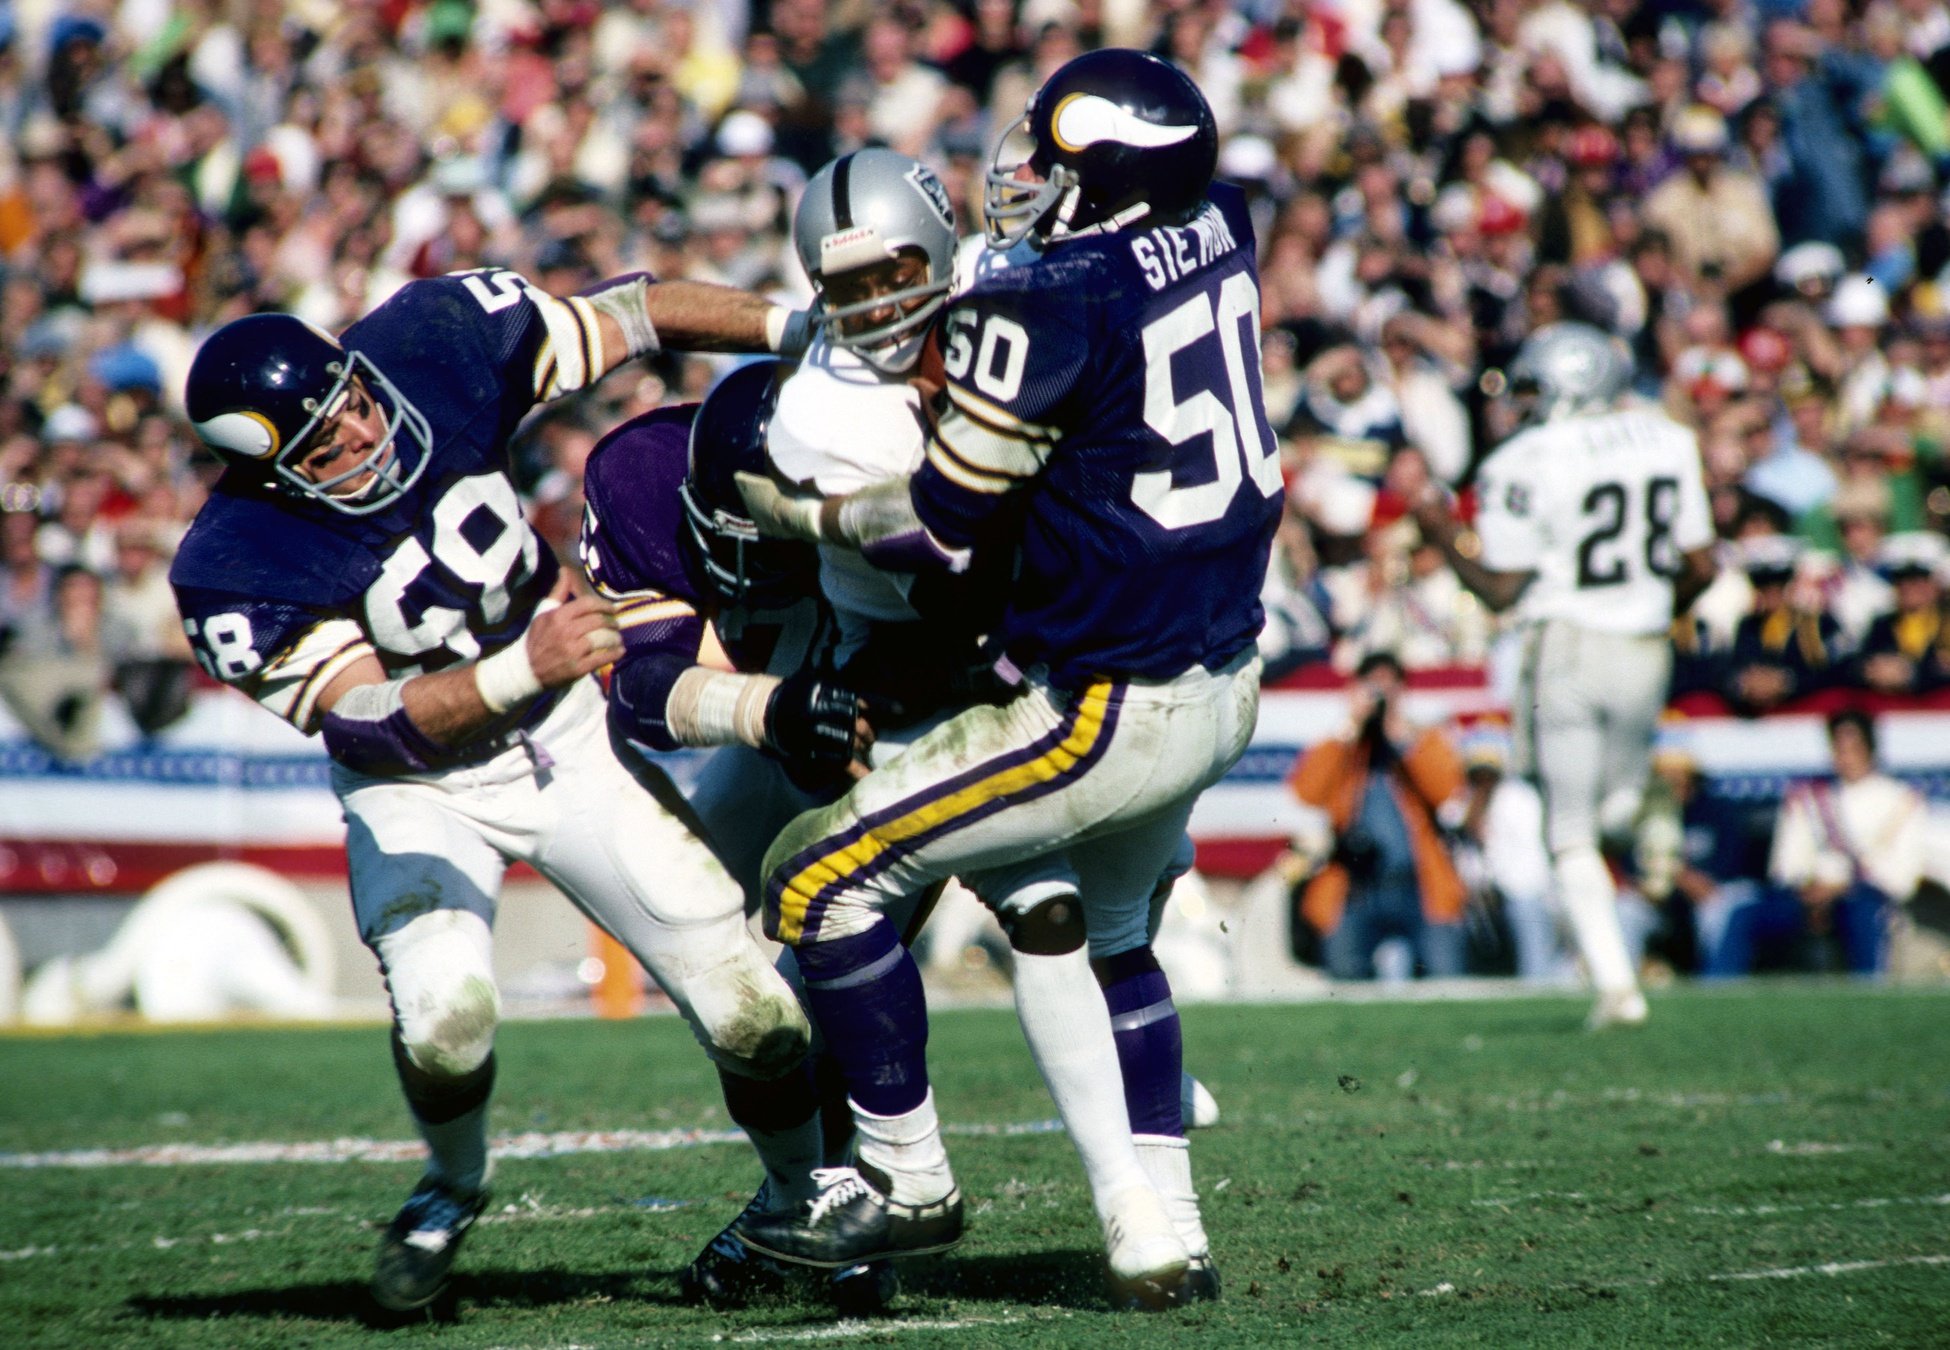 Vikings linebacker (58) Wally Hilgenberg and (50) Jeff Siemon stop Oakland Raiders receiver (21) Cliff Branch in Super Bowl XI at the Rose Bowl.